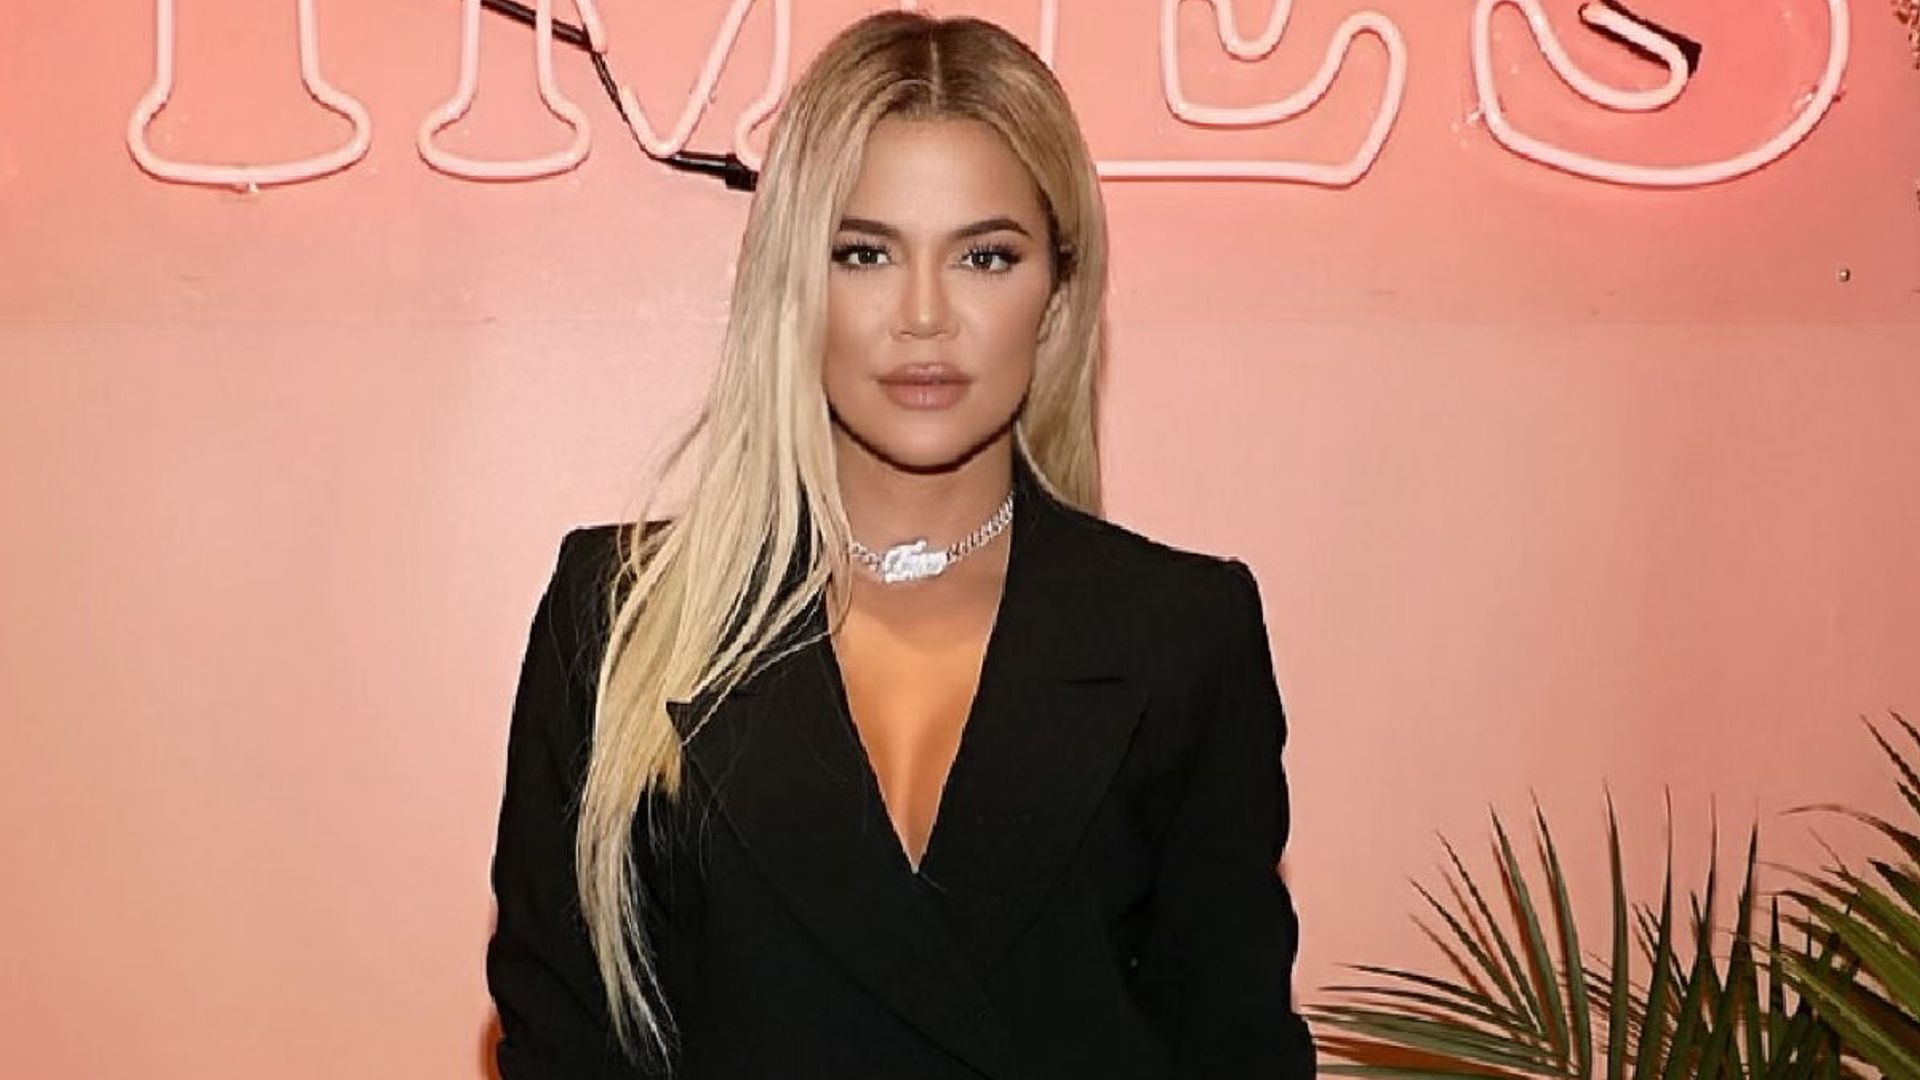 Khloe Kardashian's Good American looks are up to 70% off for your spring wardrobe revamp